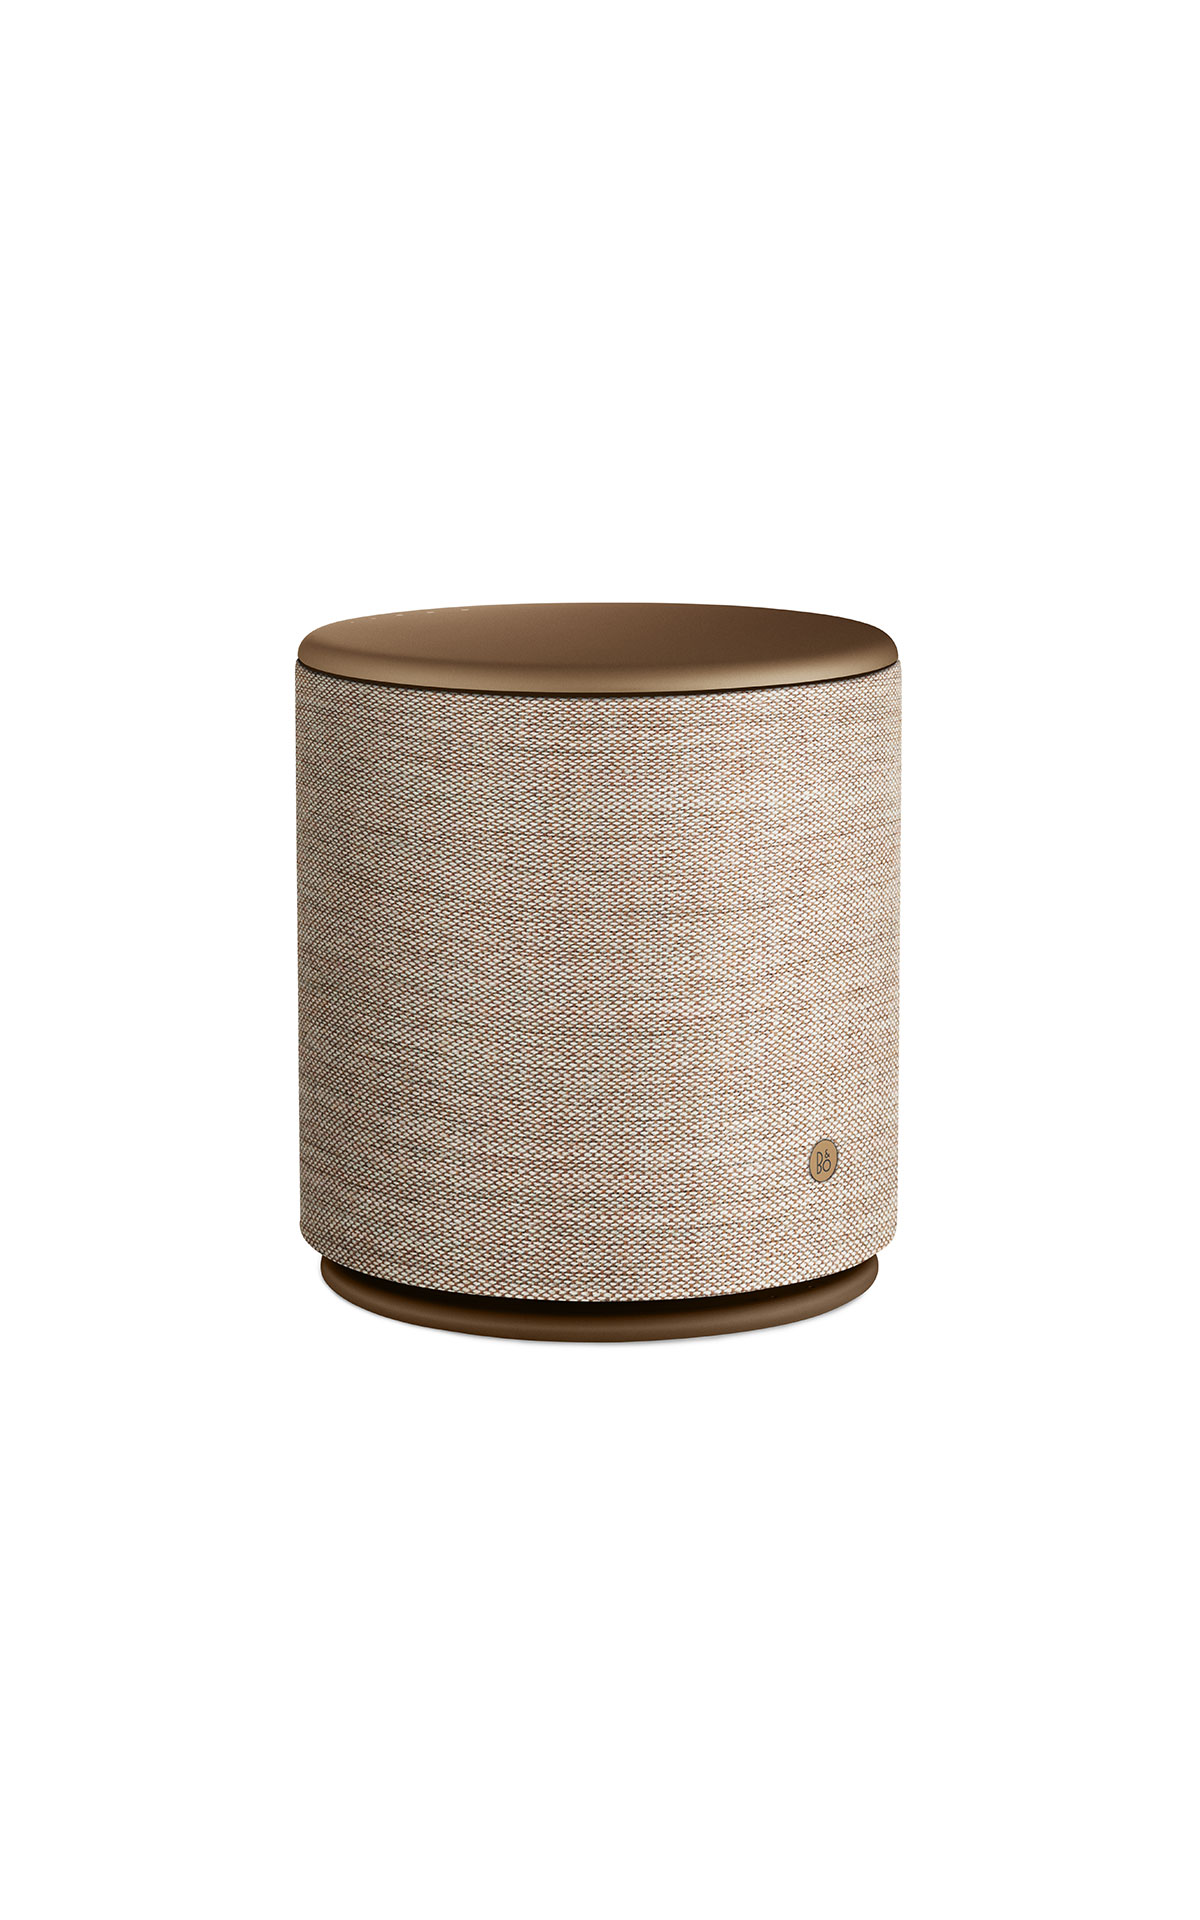 Bang & Olufsen Beoplay M5 from Bicester Village